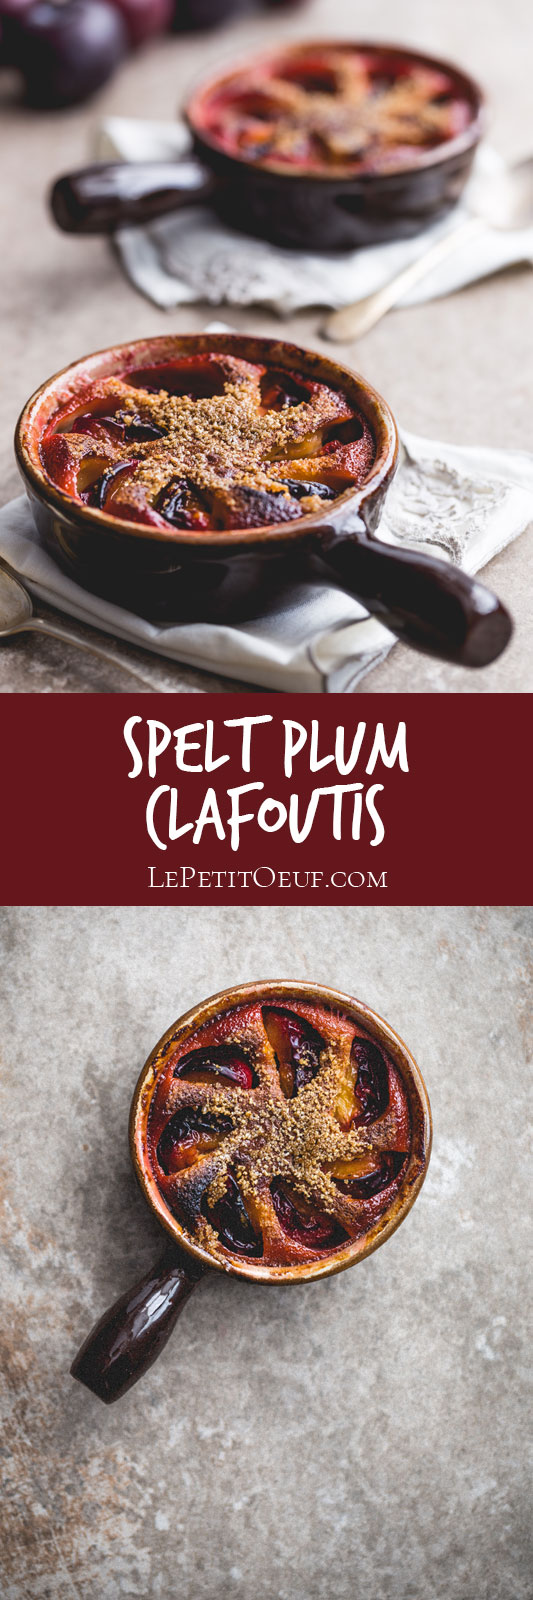 Seasonal plums cooked in batter and topped with demerara sugar heated under the grill to give a crispy, crunchy lid. This dessert is simple, opulent and as romantic as the French name implies. Perfect make-ahead dessert for guests.